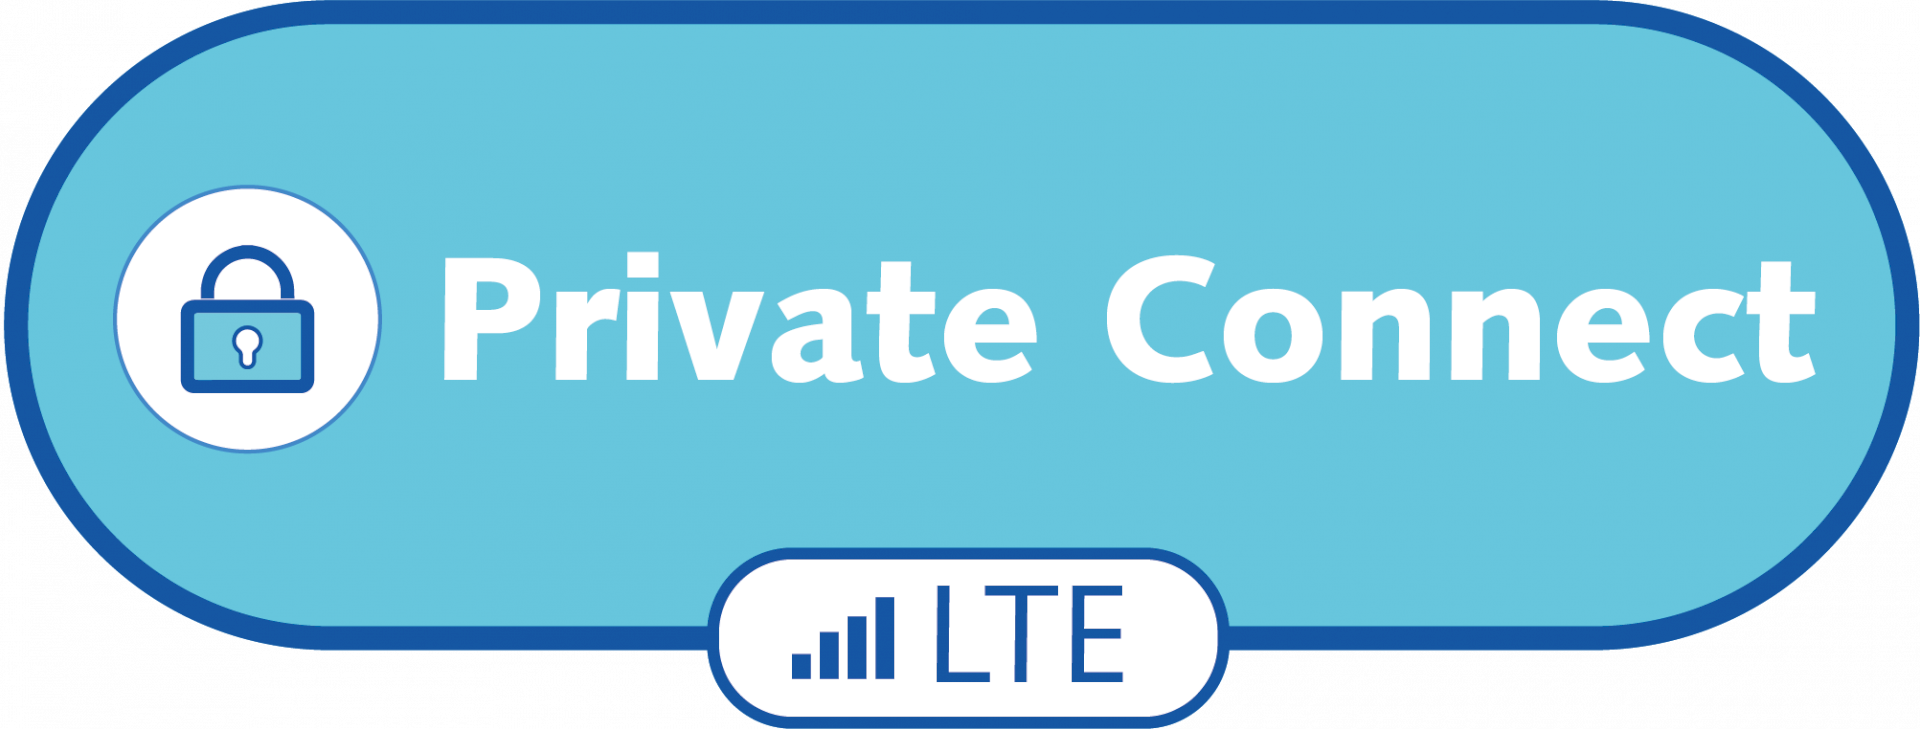 Private Connect LTE private IoT netwerk MCS